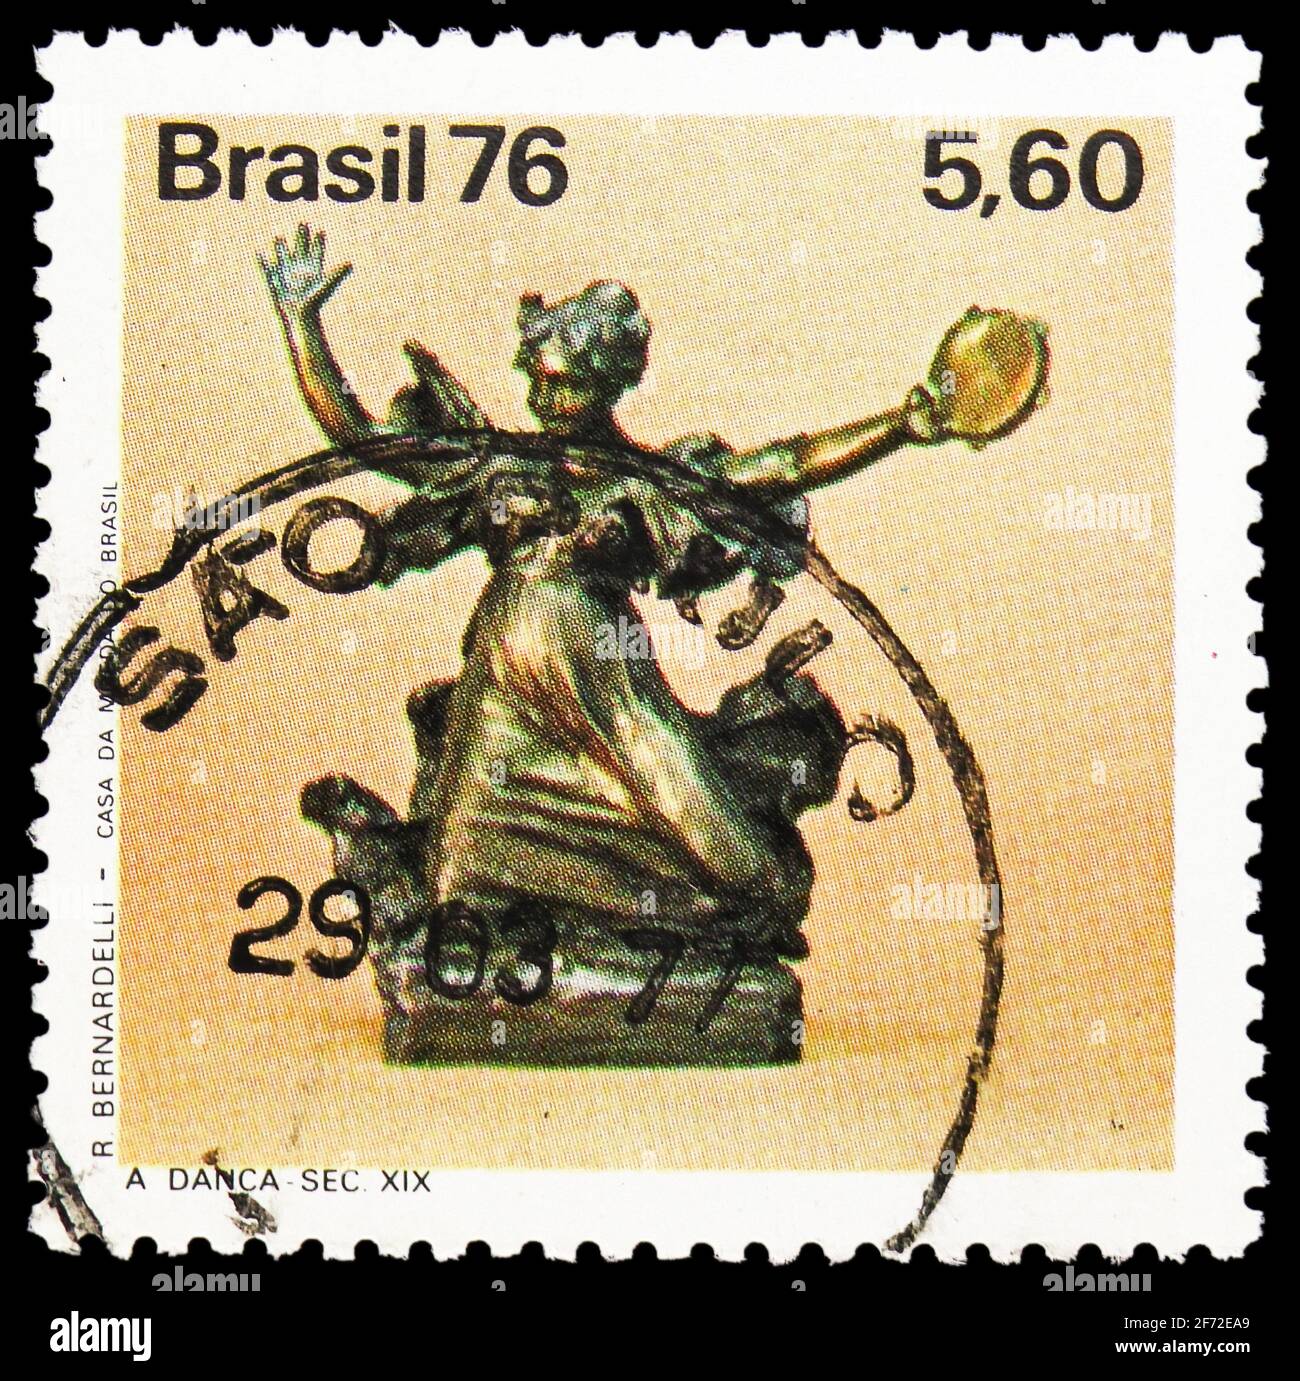 MOSCOW, RUSSIA - JANUARY 20, 2021: Postage stamp printed in Brazil shows The Dance, J. Bernardelli, Brazilian Sculpture serie, circa 1976 Stock Photo